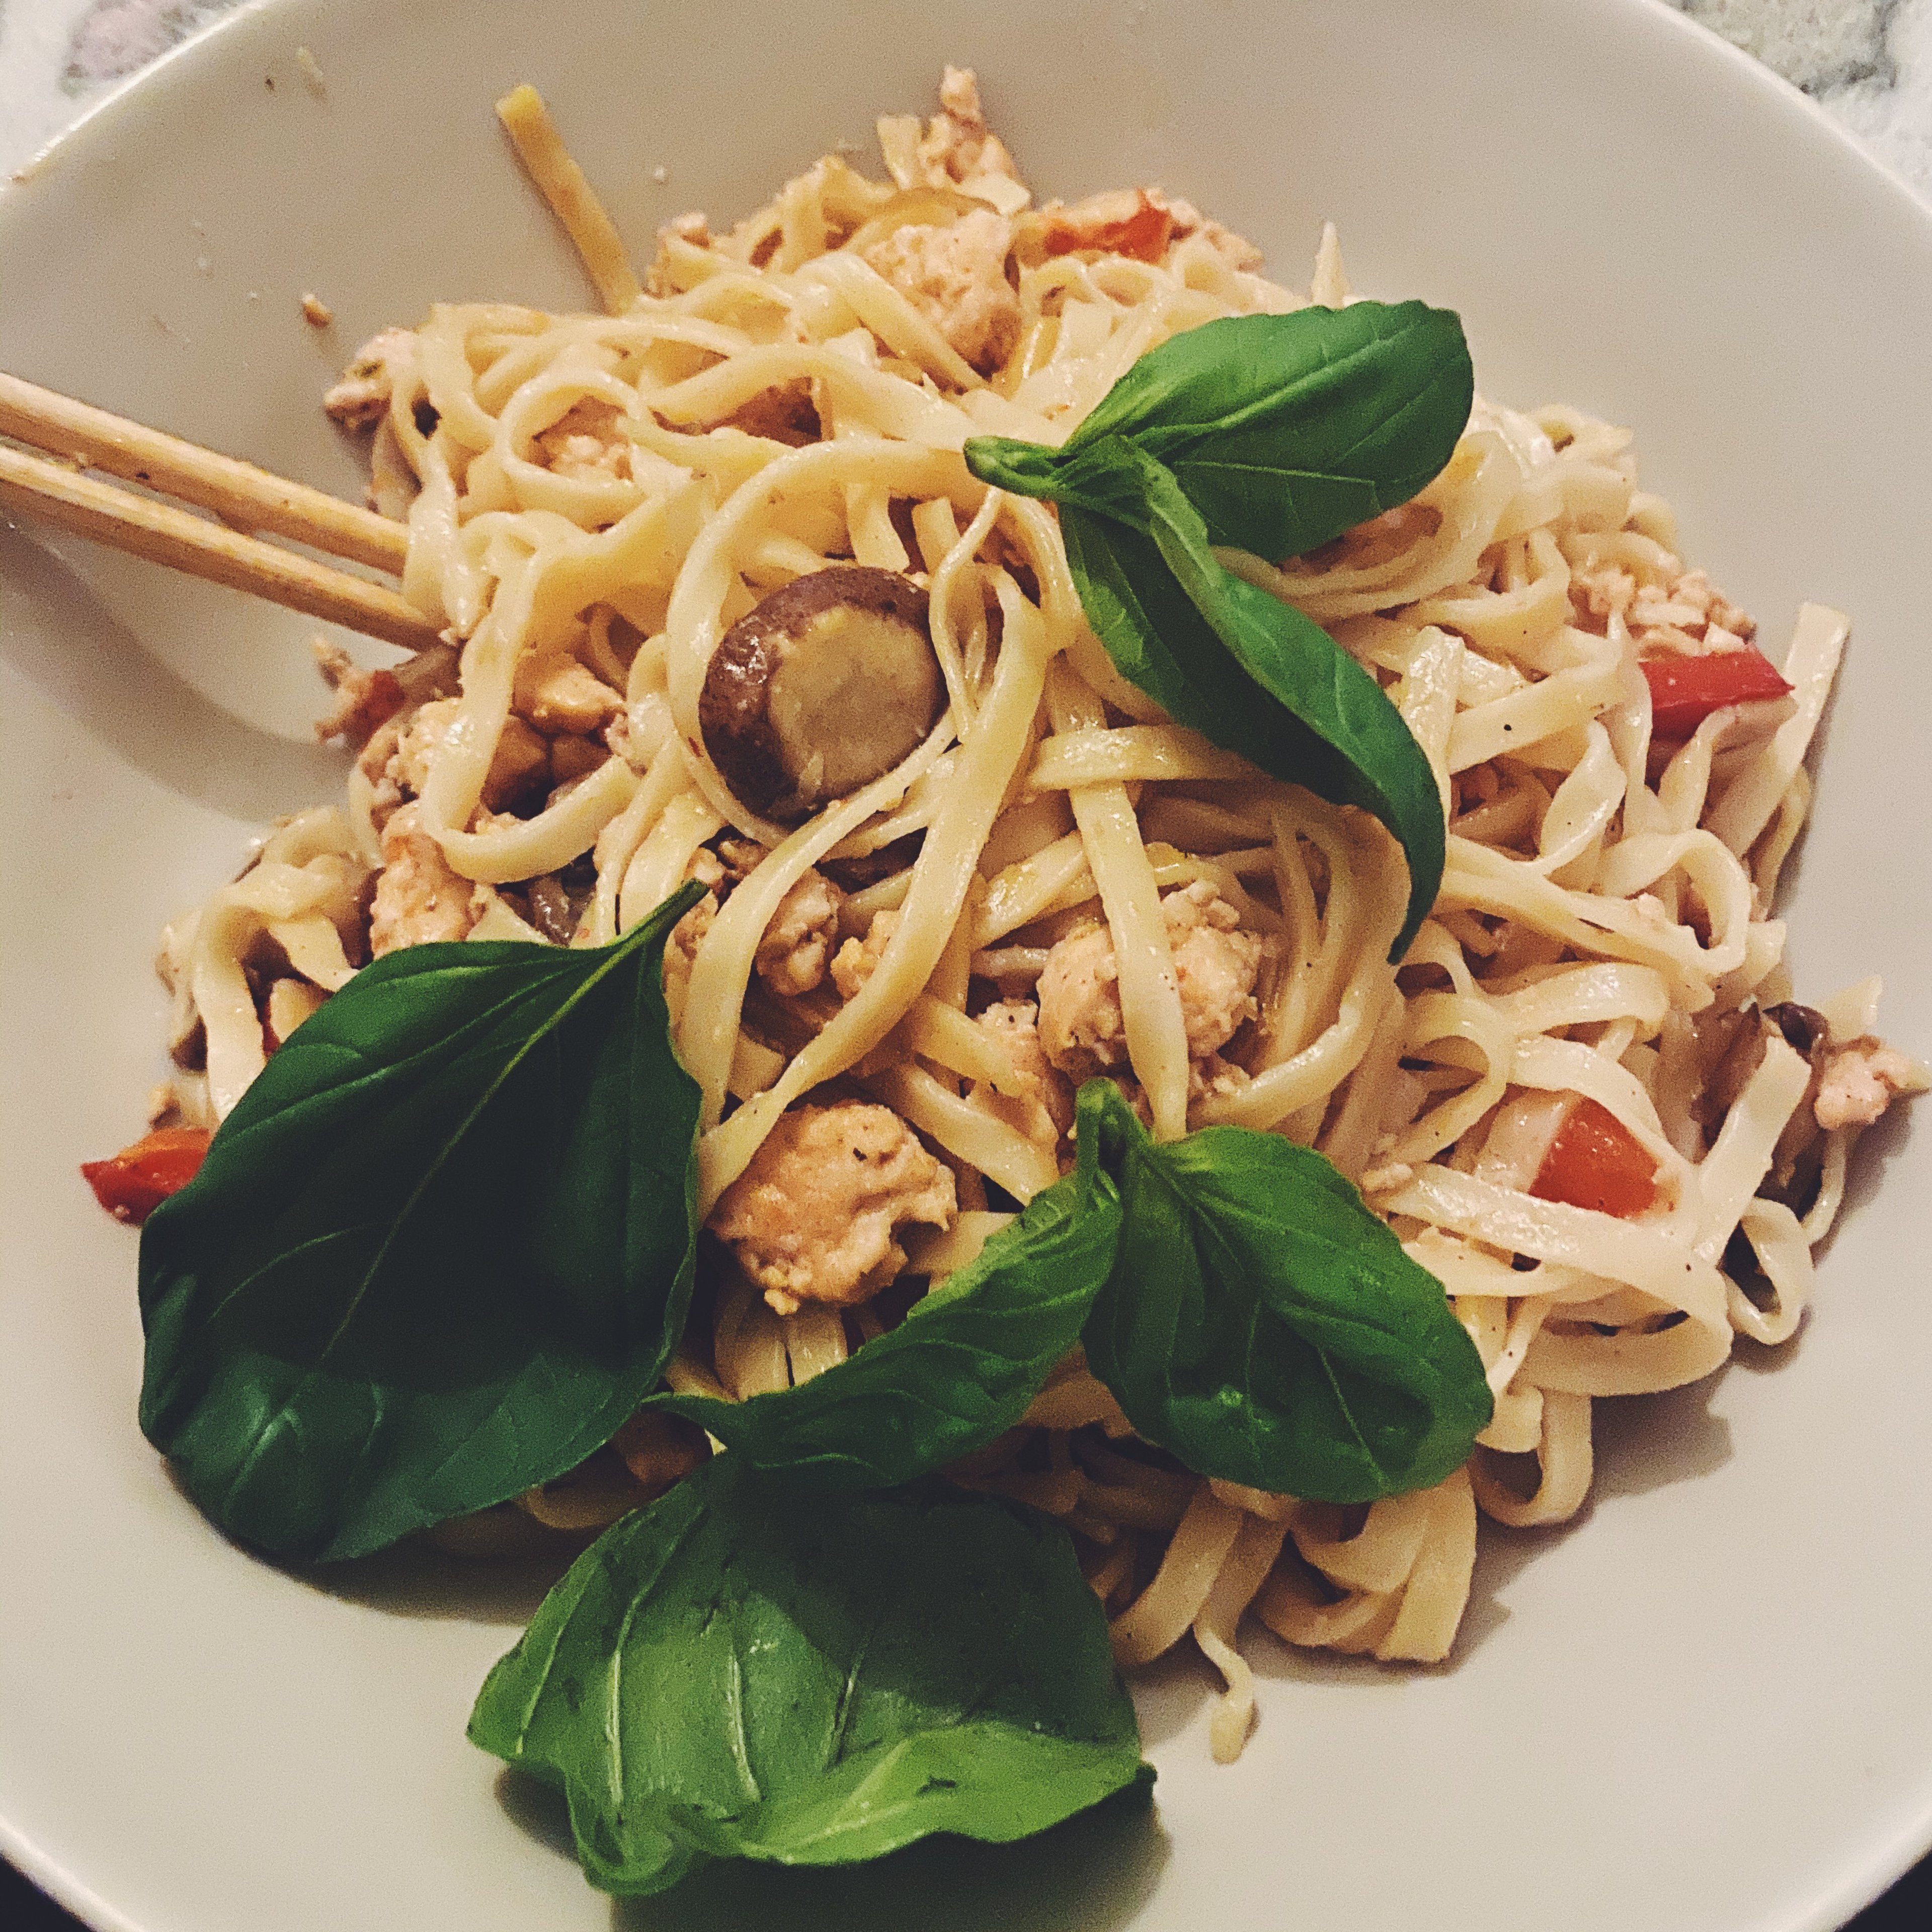 Chicken and red pepper stir-fry